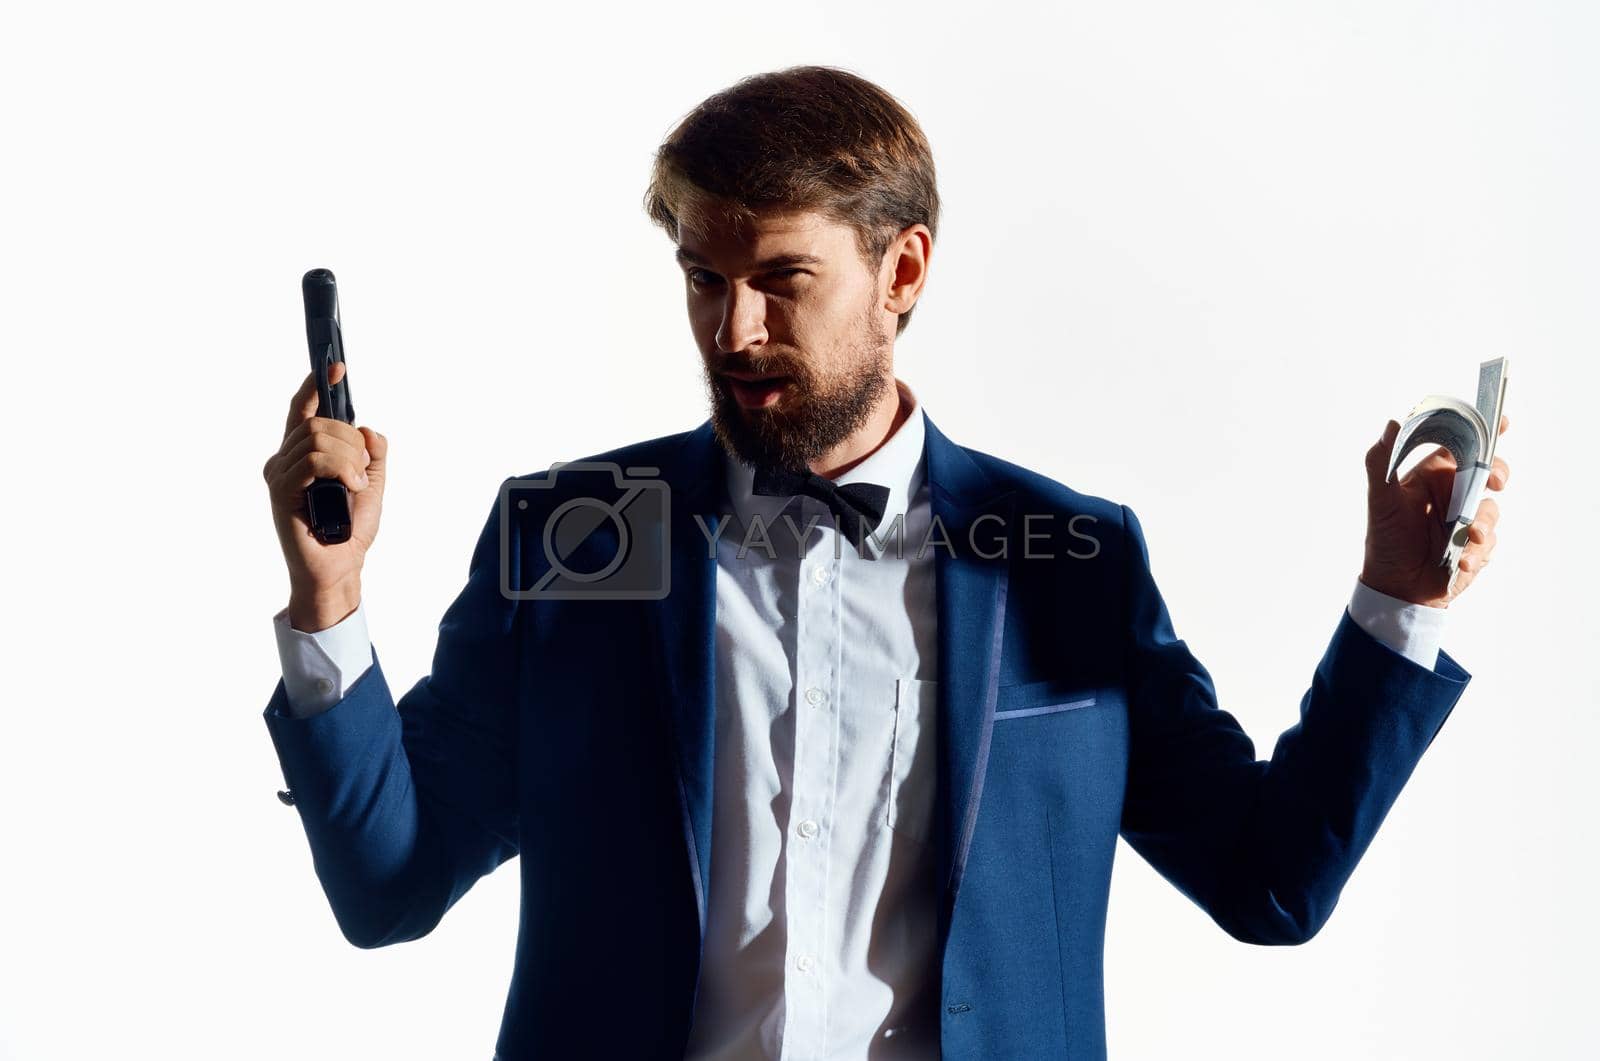 Royalty free image of man in suit gun money gangster business light background by SHOTPRIME